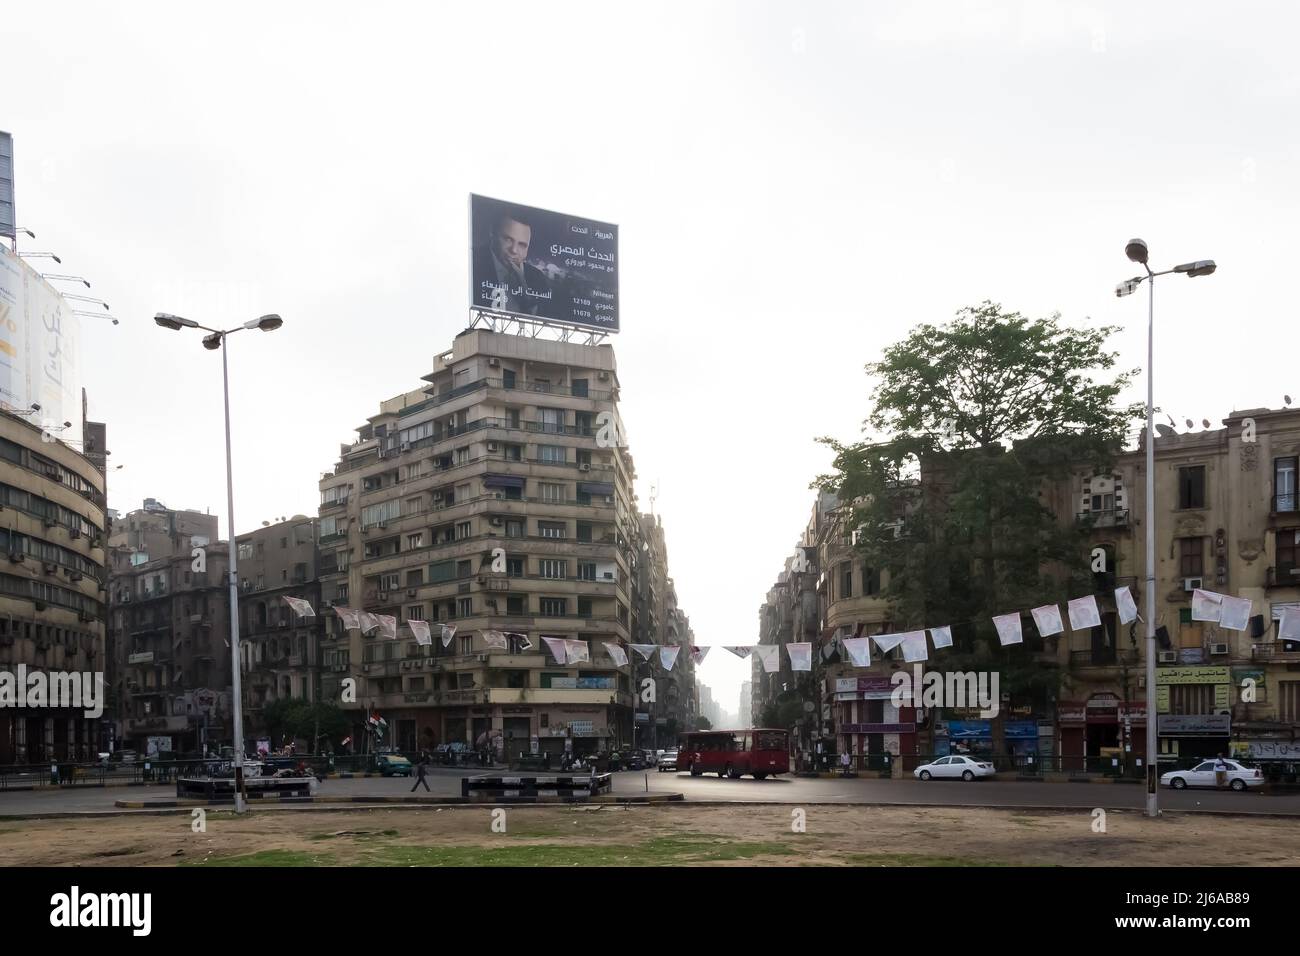 Urban landscape of the city center at the Tahrir Square (Liberation Square), also known as Martyr Square, a major public town square in downtown Cairo Stock Photo